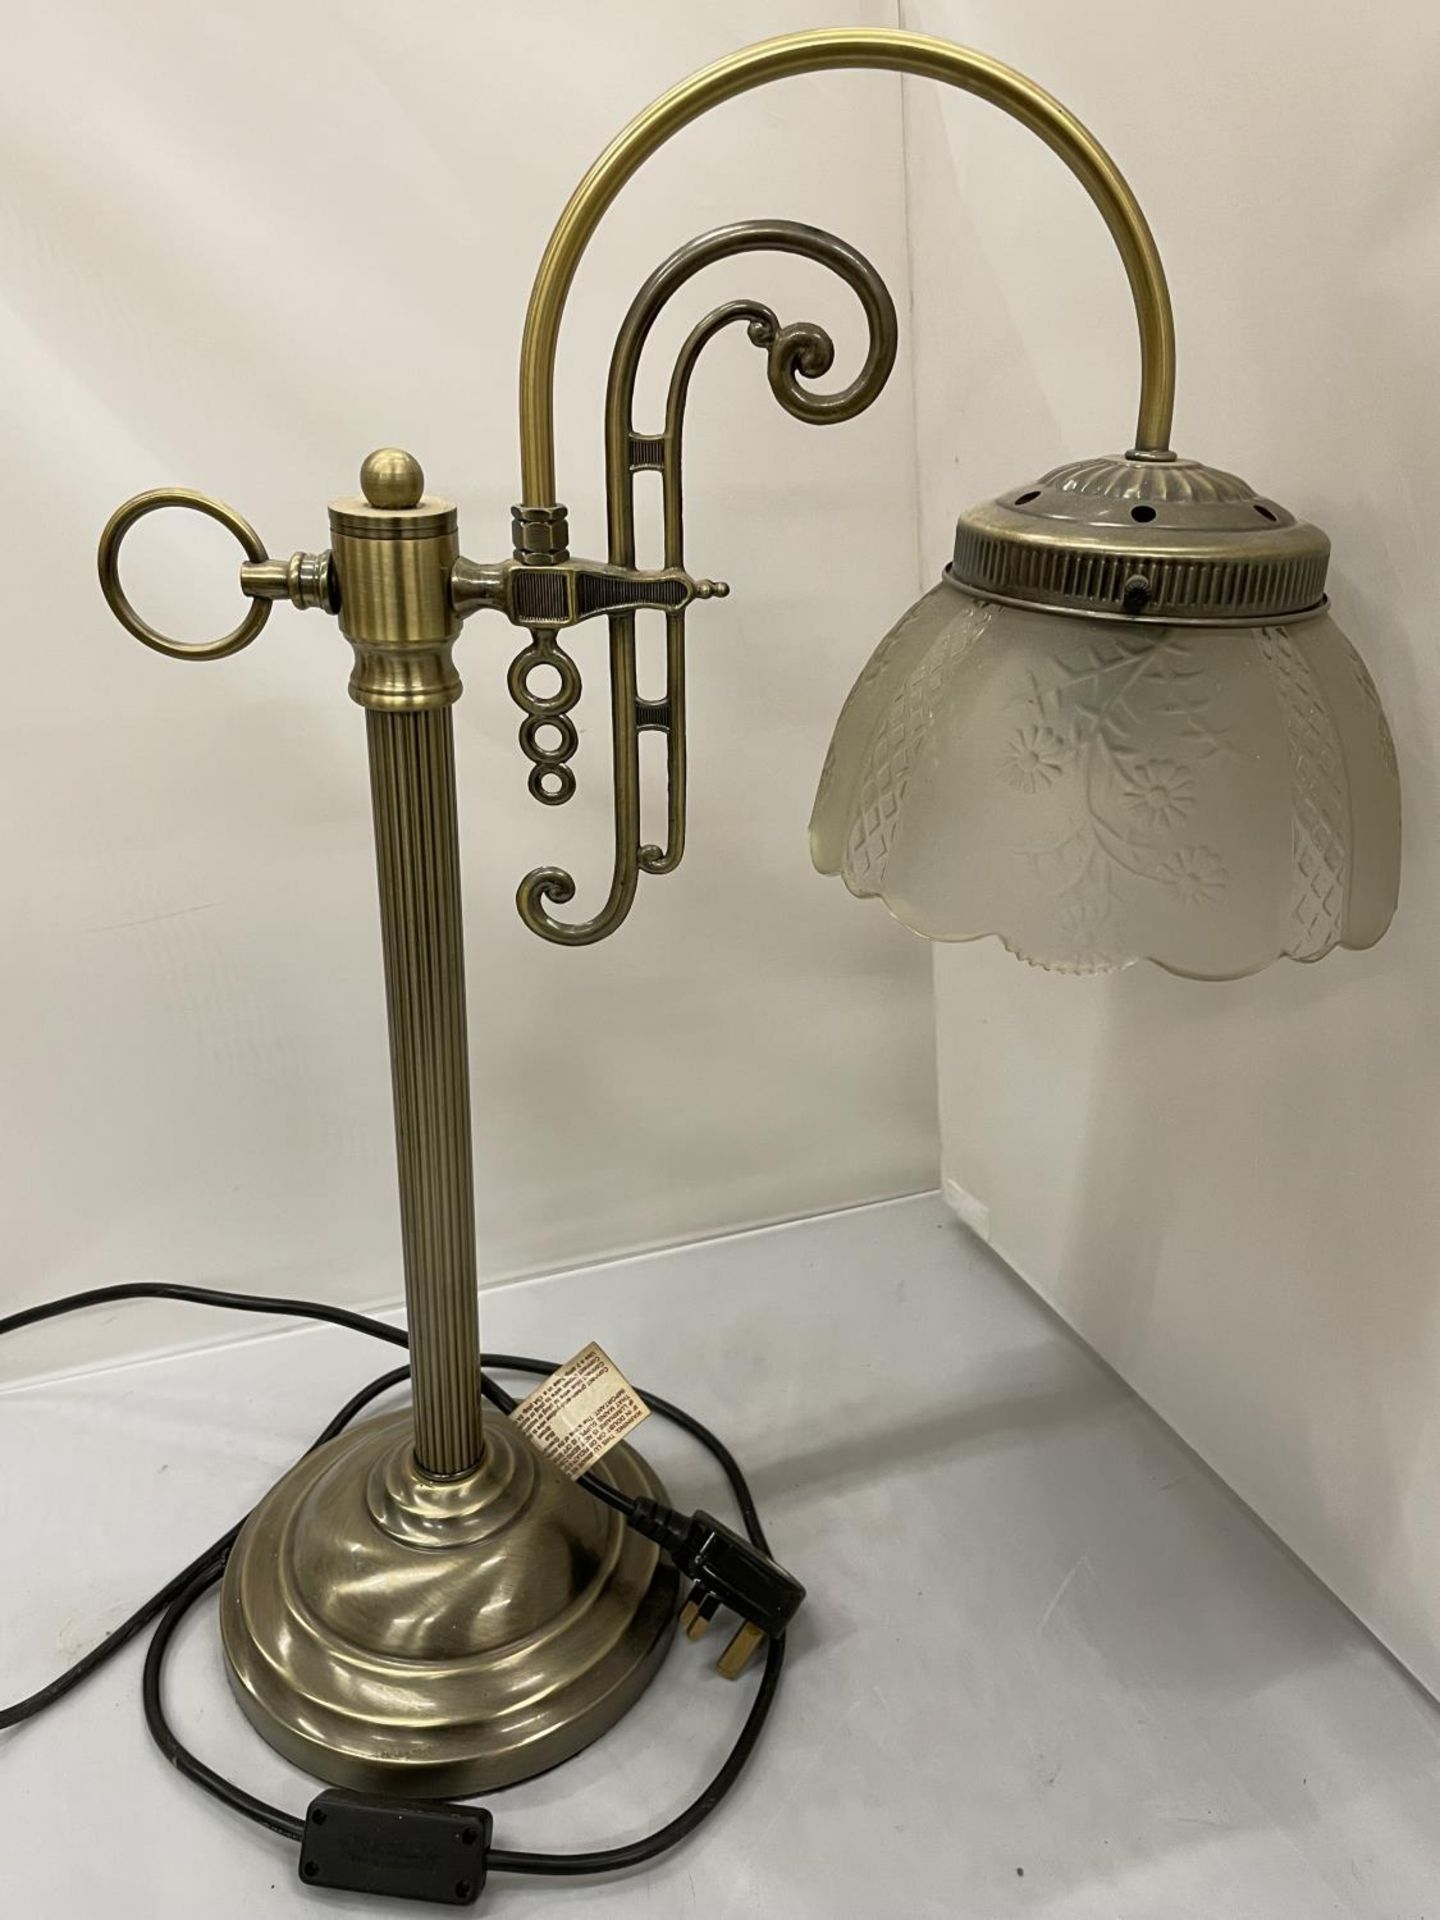 AN ANTIQUE STYLE BRASS DESK LAMP WITH GLASS SHADE - Image 4 of 4